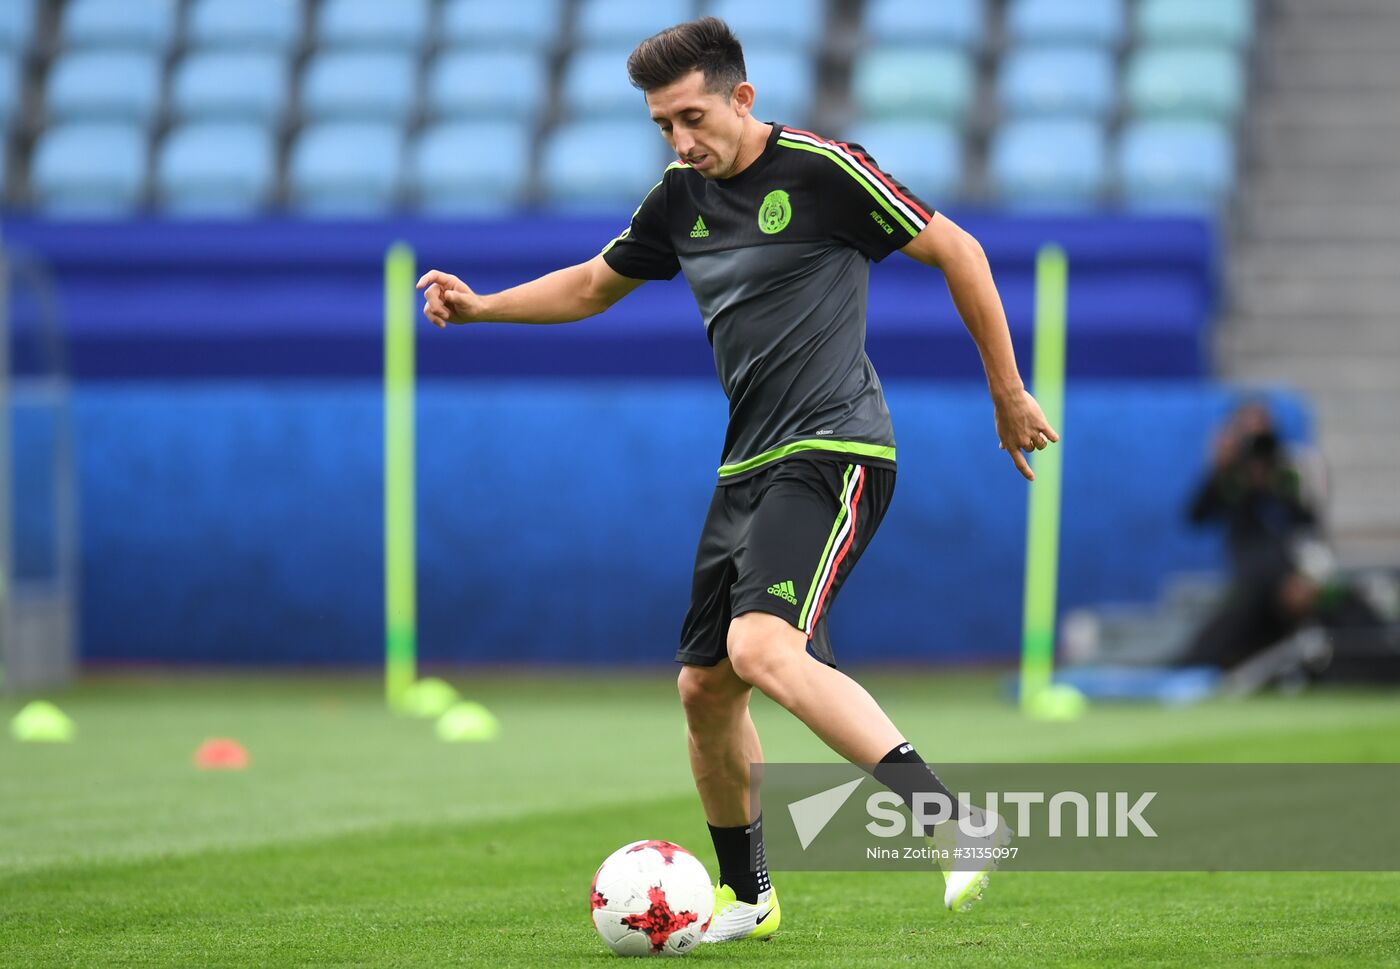 Football. 2017 FIFA Confederations Cup. Training session of Mexico's national team